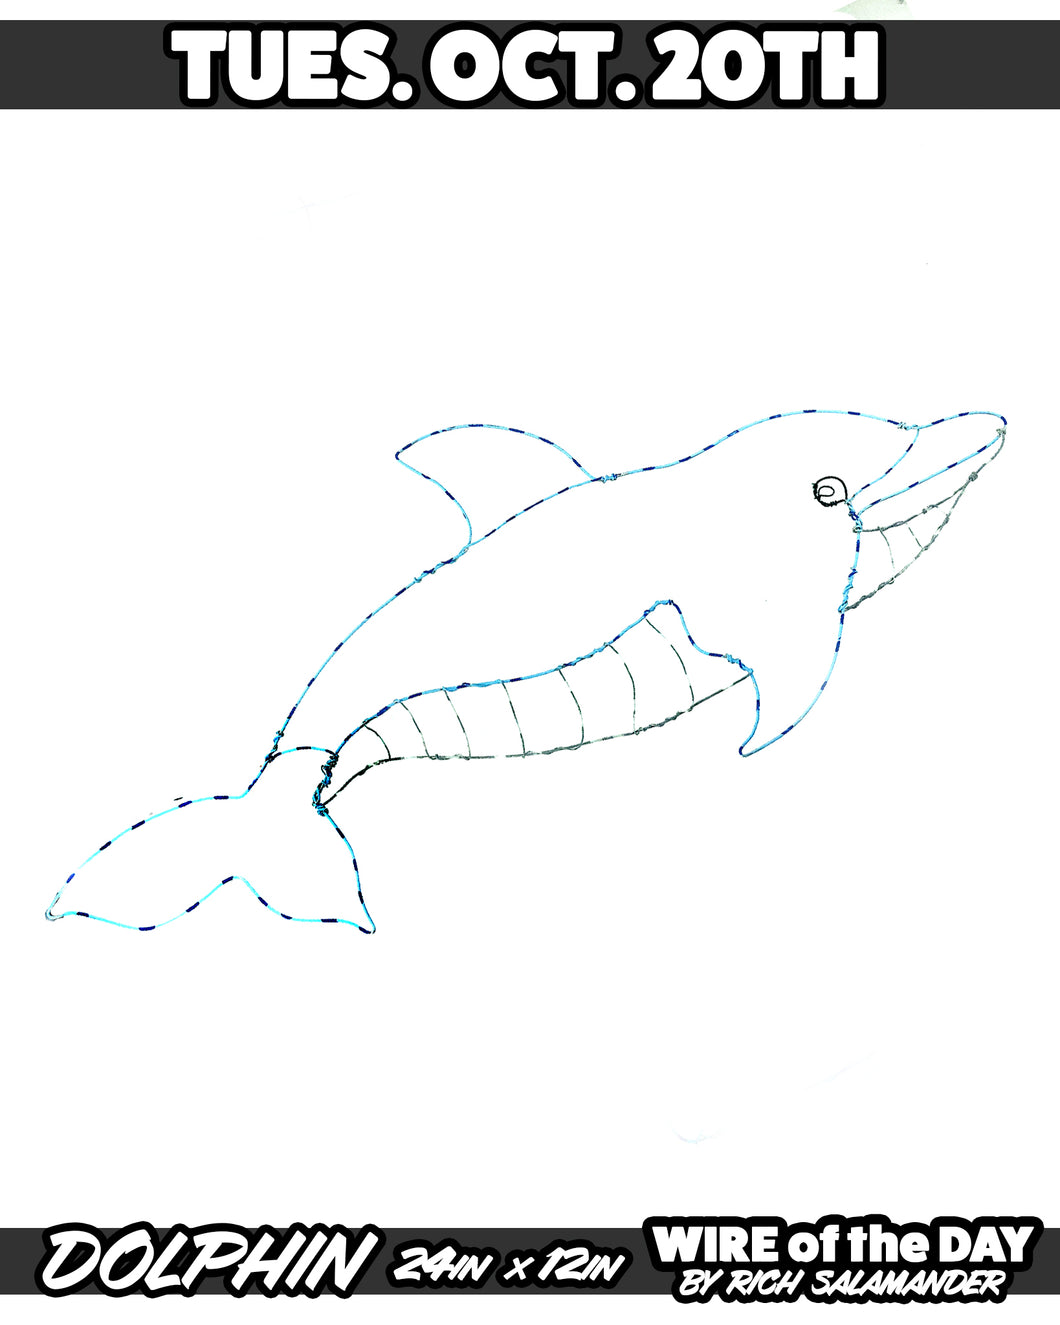 WIRE of the DAY DOLPHIN